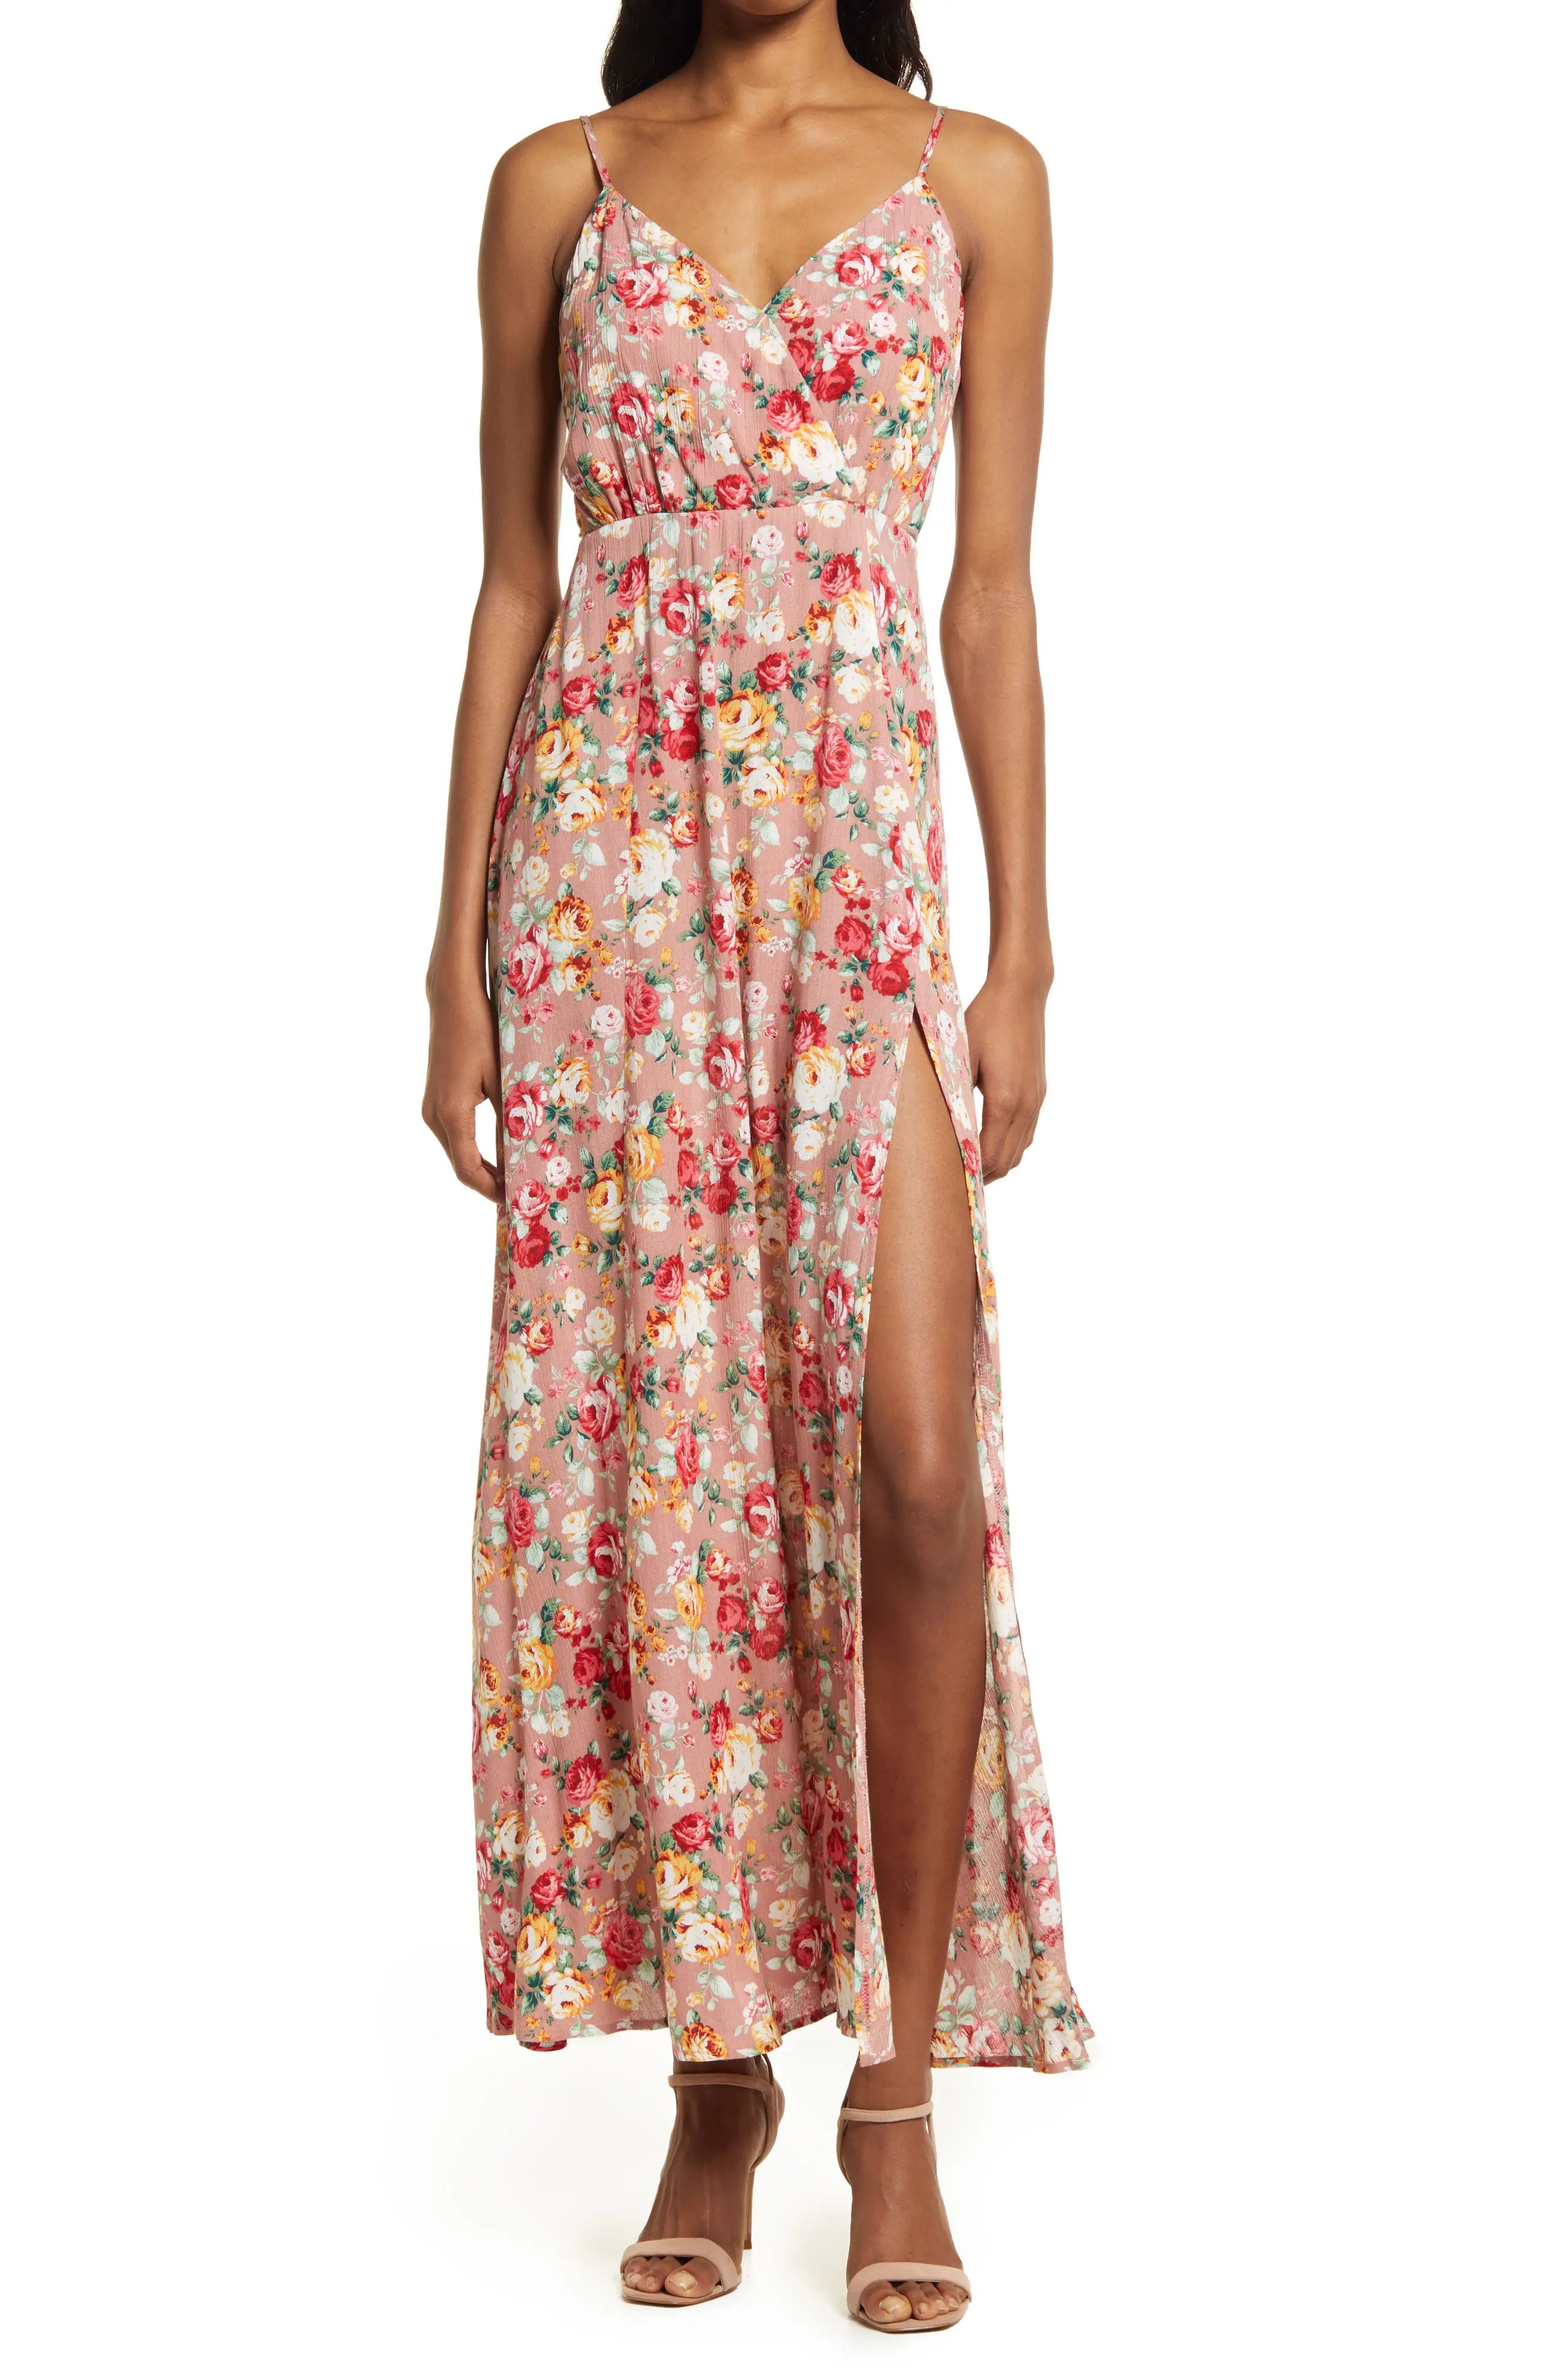 Lulus Everlasting Bliss Floral Print Maxi Dress in Blush Floral Print at Nordstrom, Size X-Small | Nordstrom